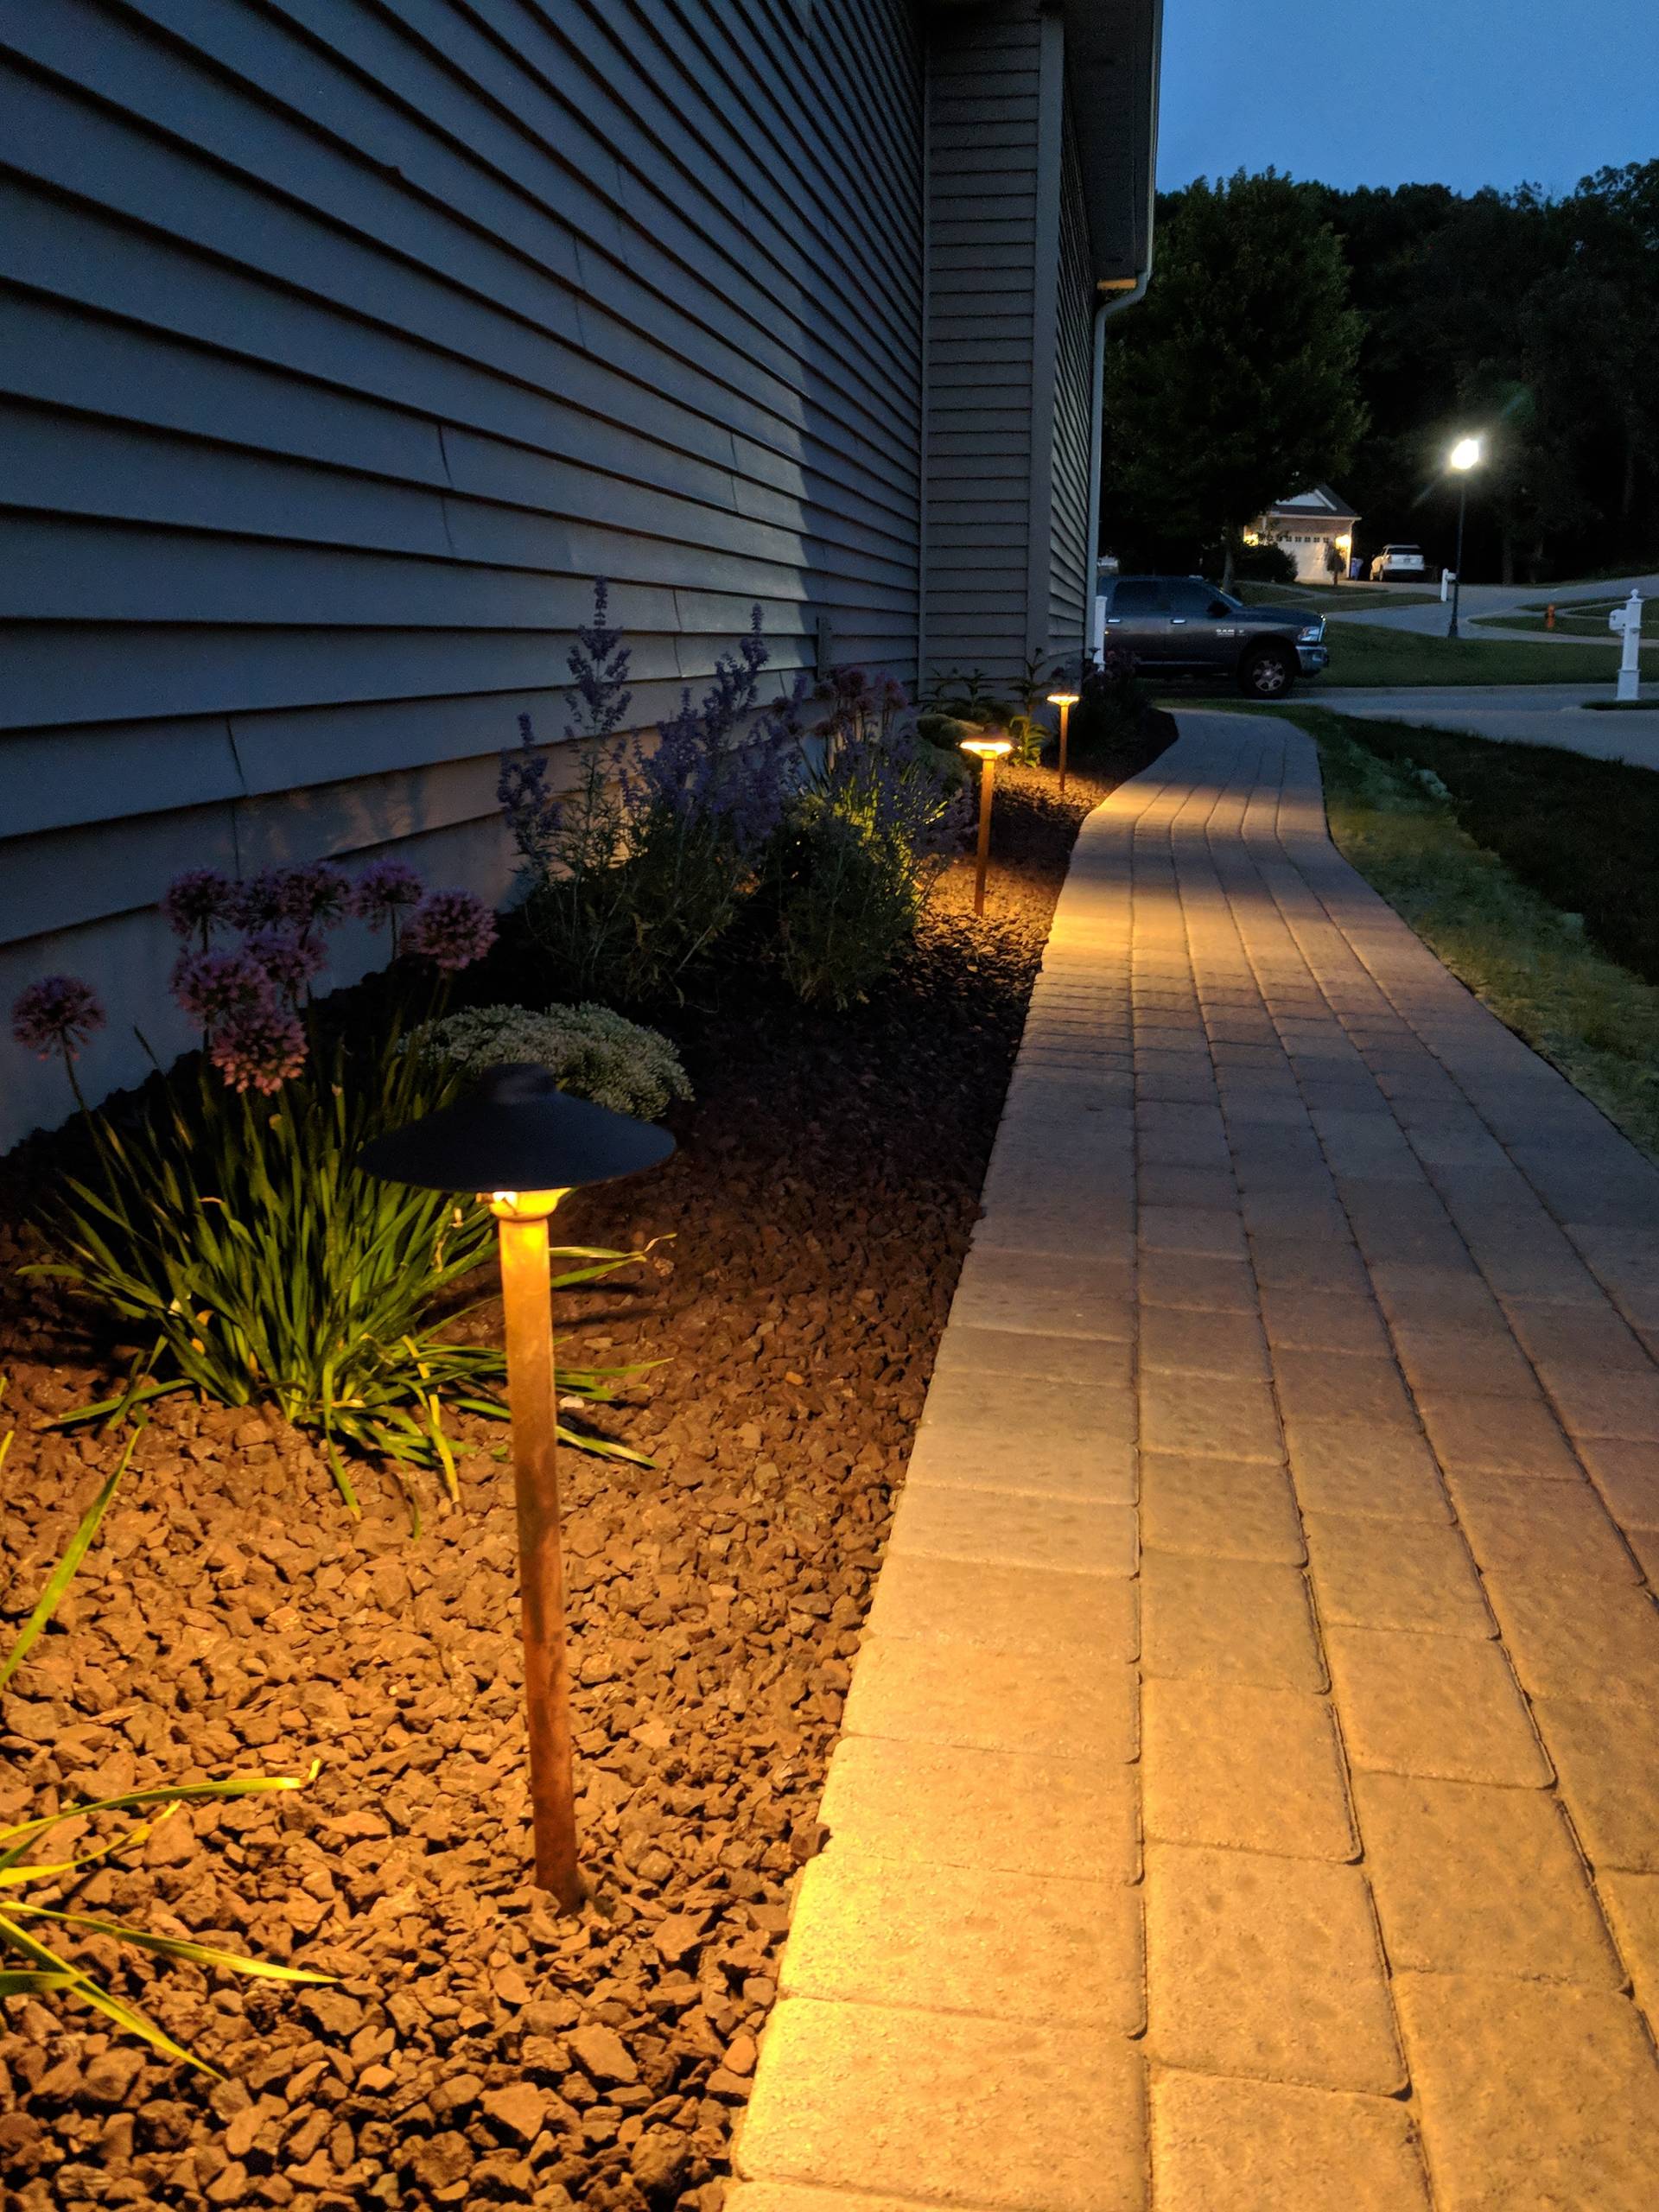 Crown Point Patio and Lighting